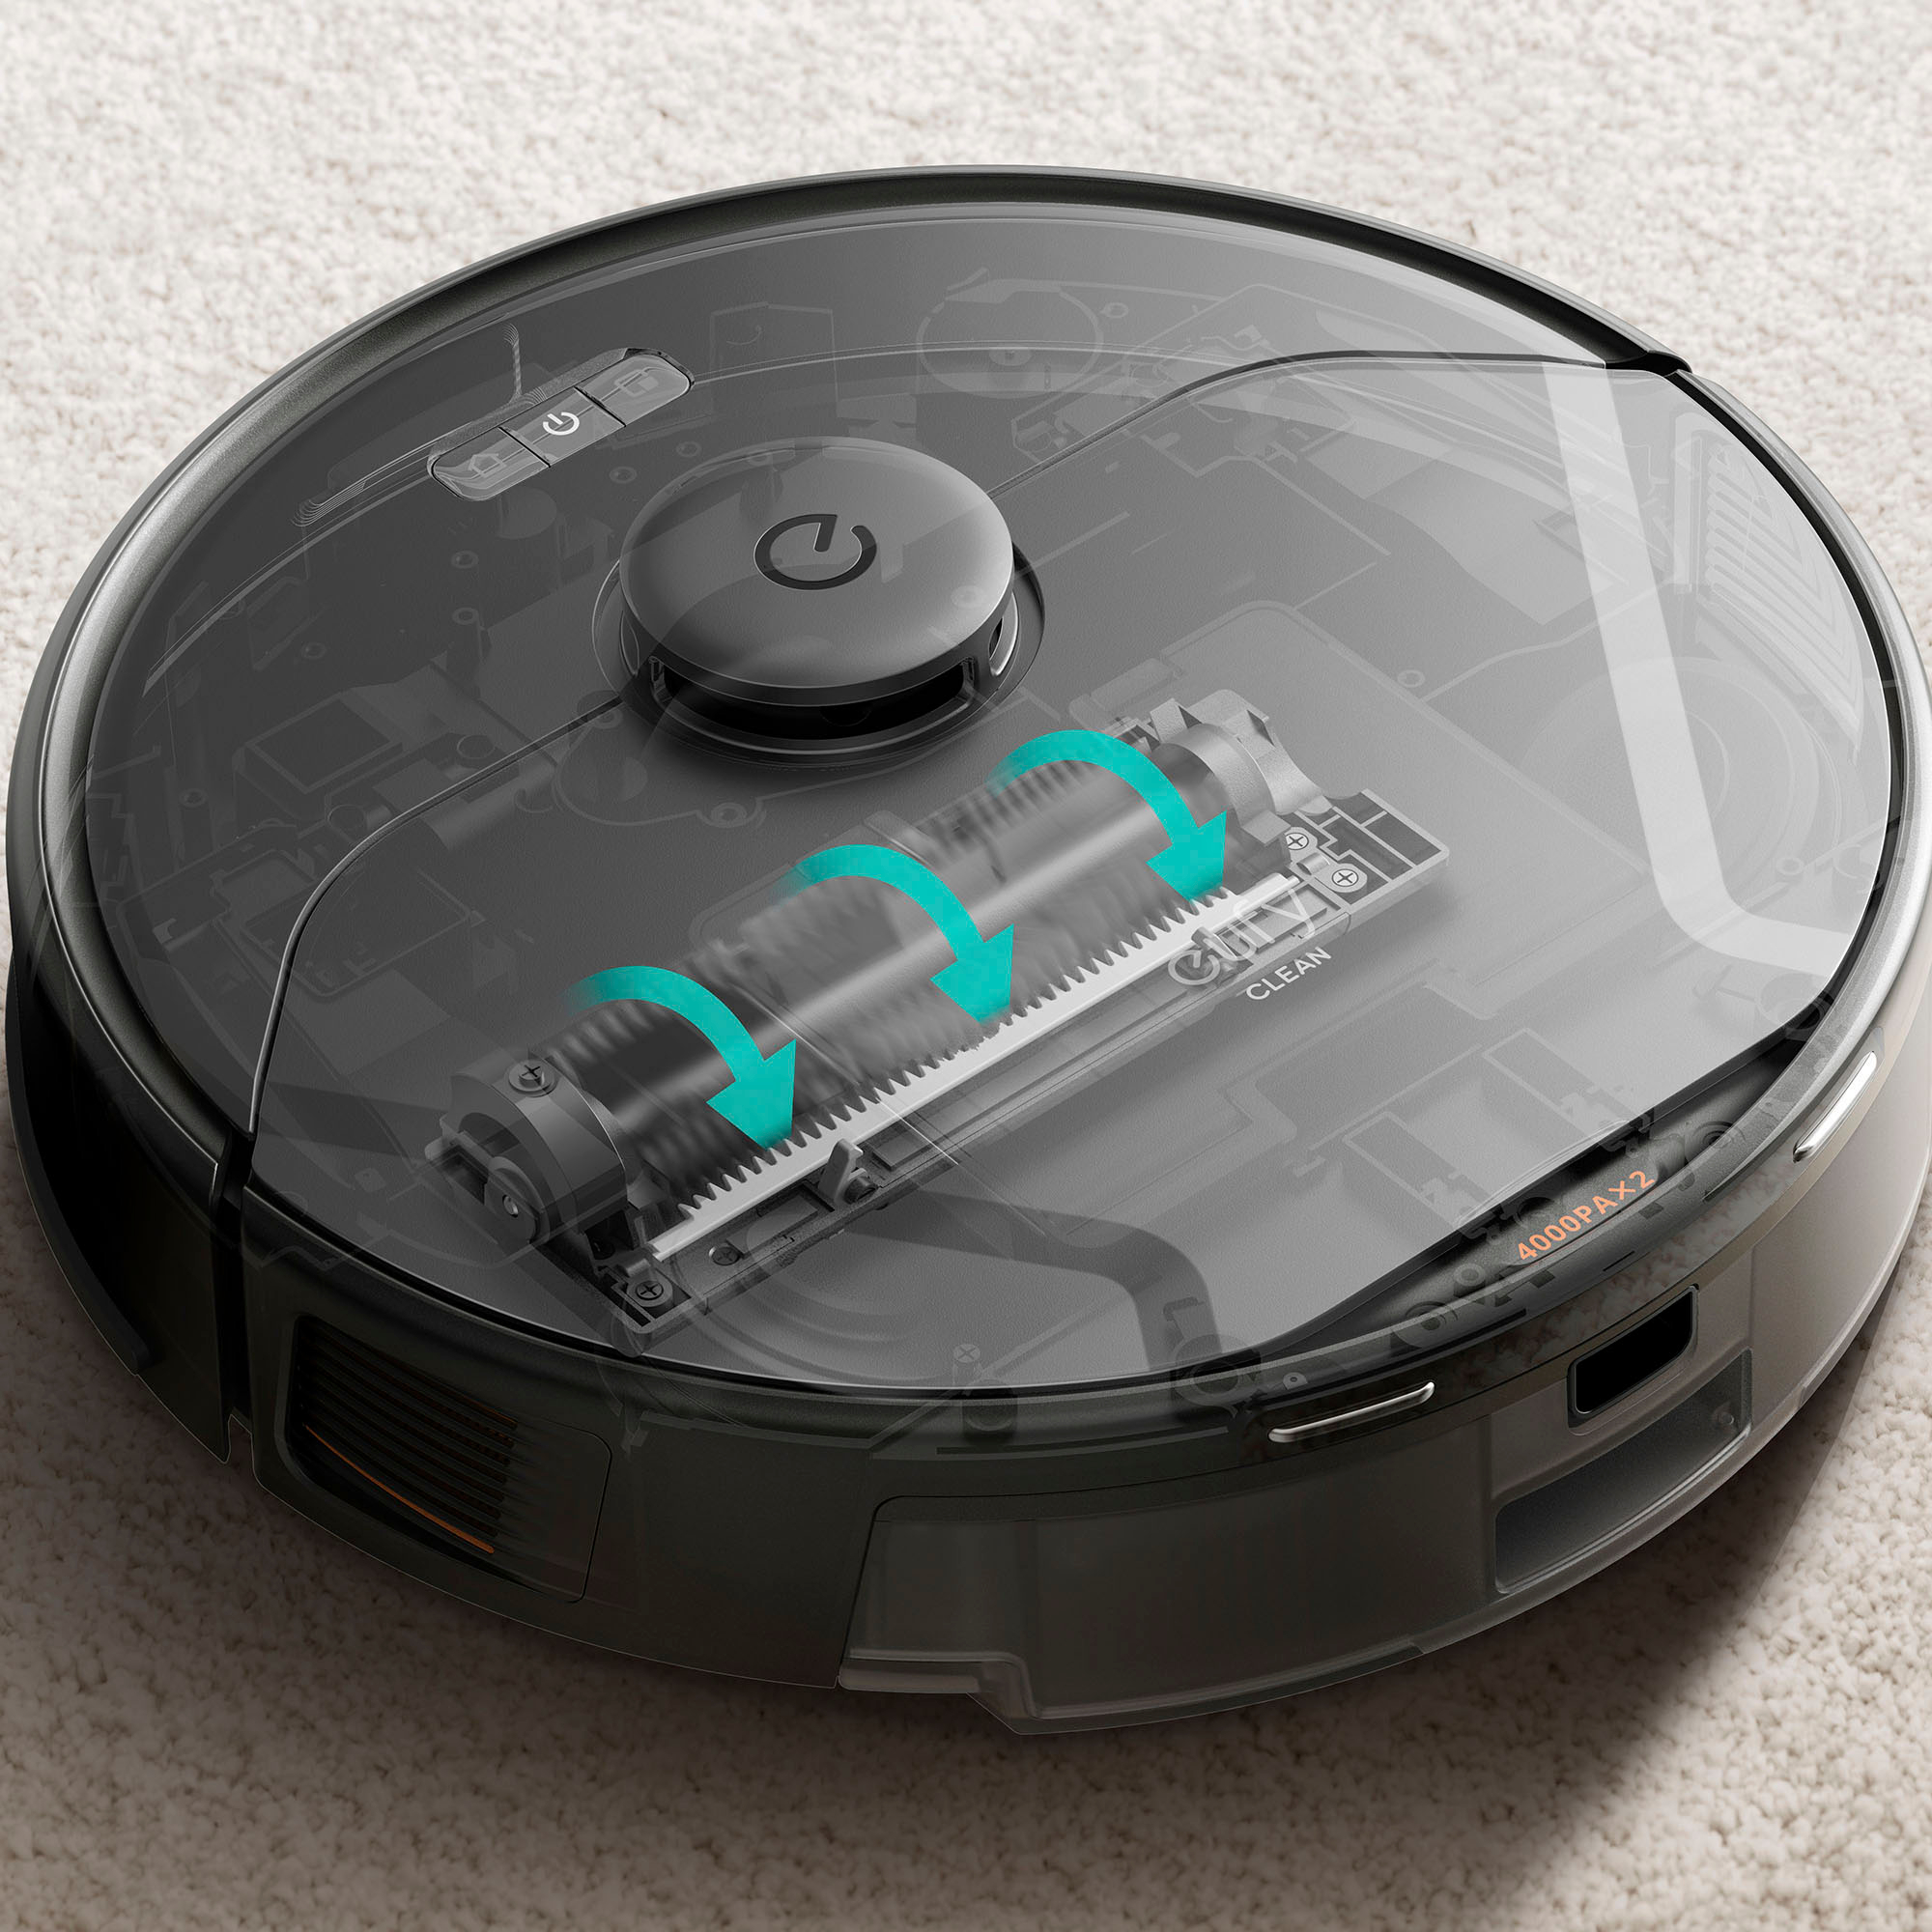 Giveaway - eufy Clean: Win a Robot Vacuum and More! - Deals